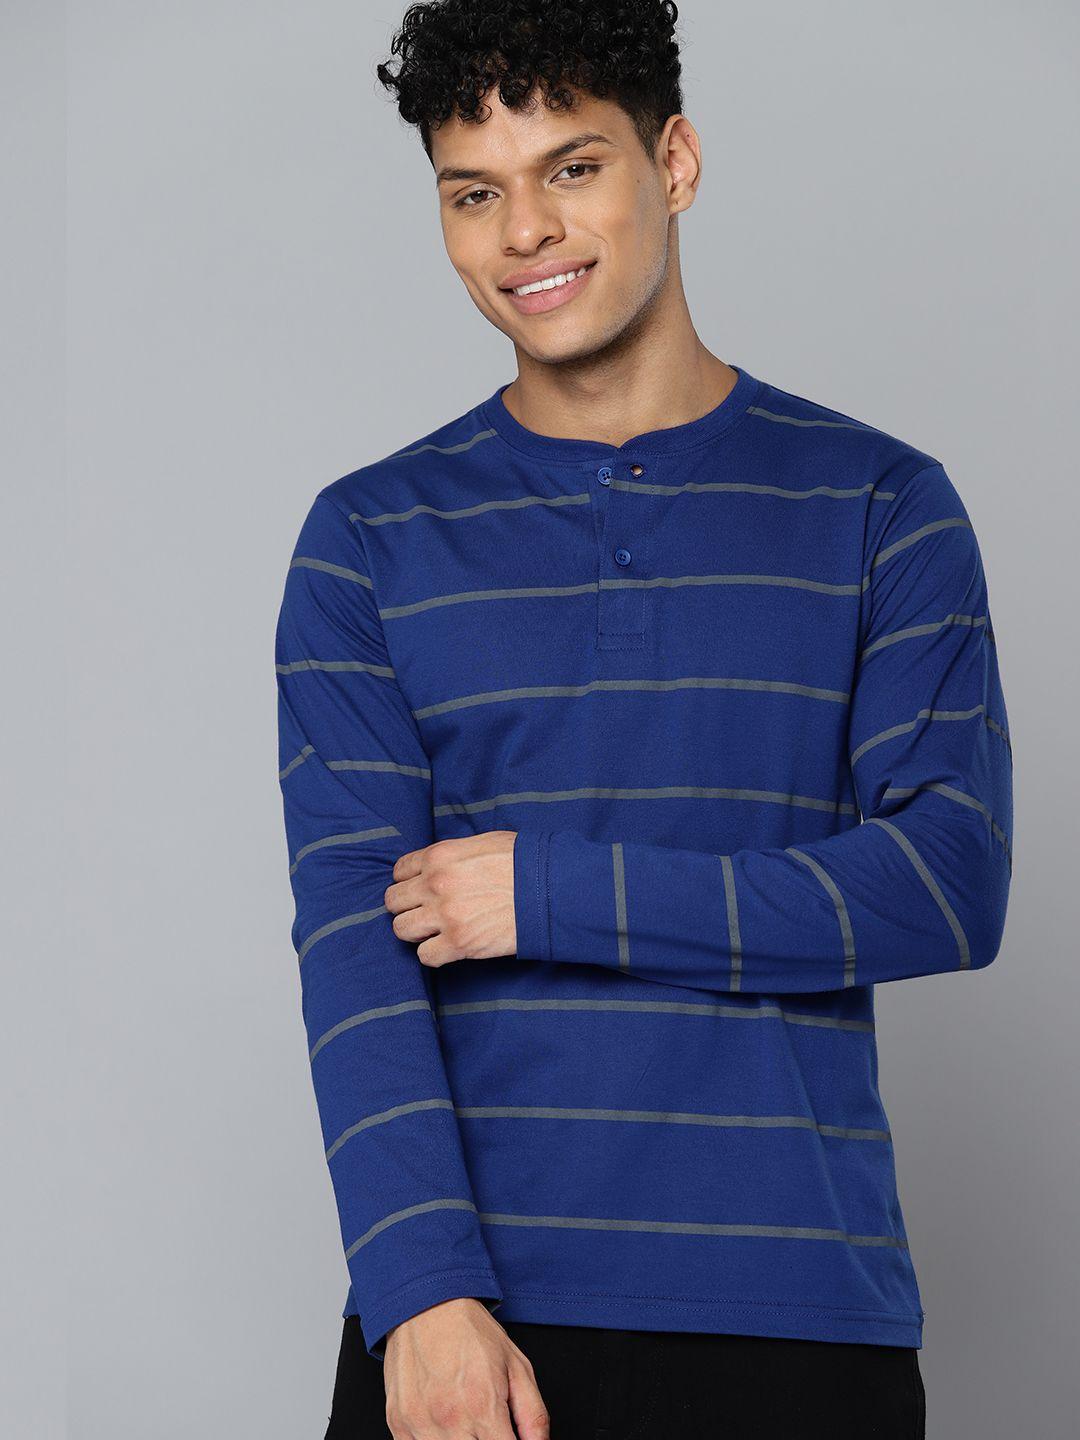 here&now striped henley neck t-shirt